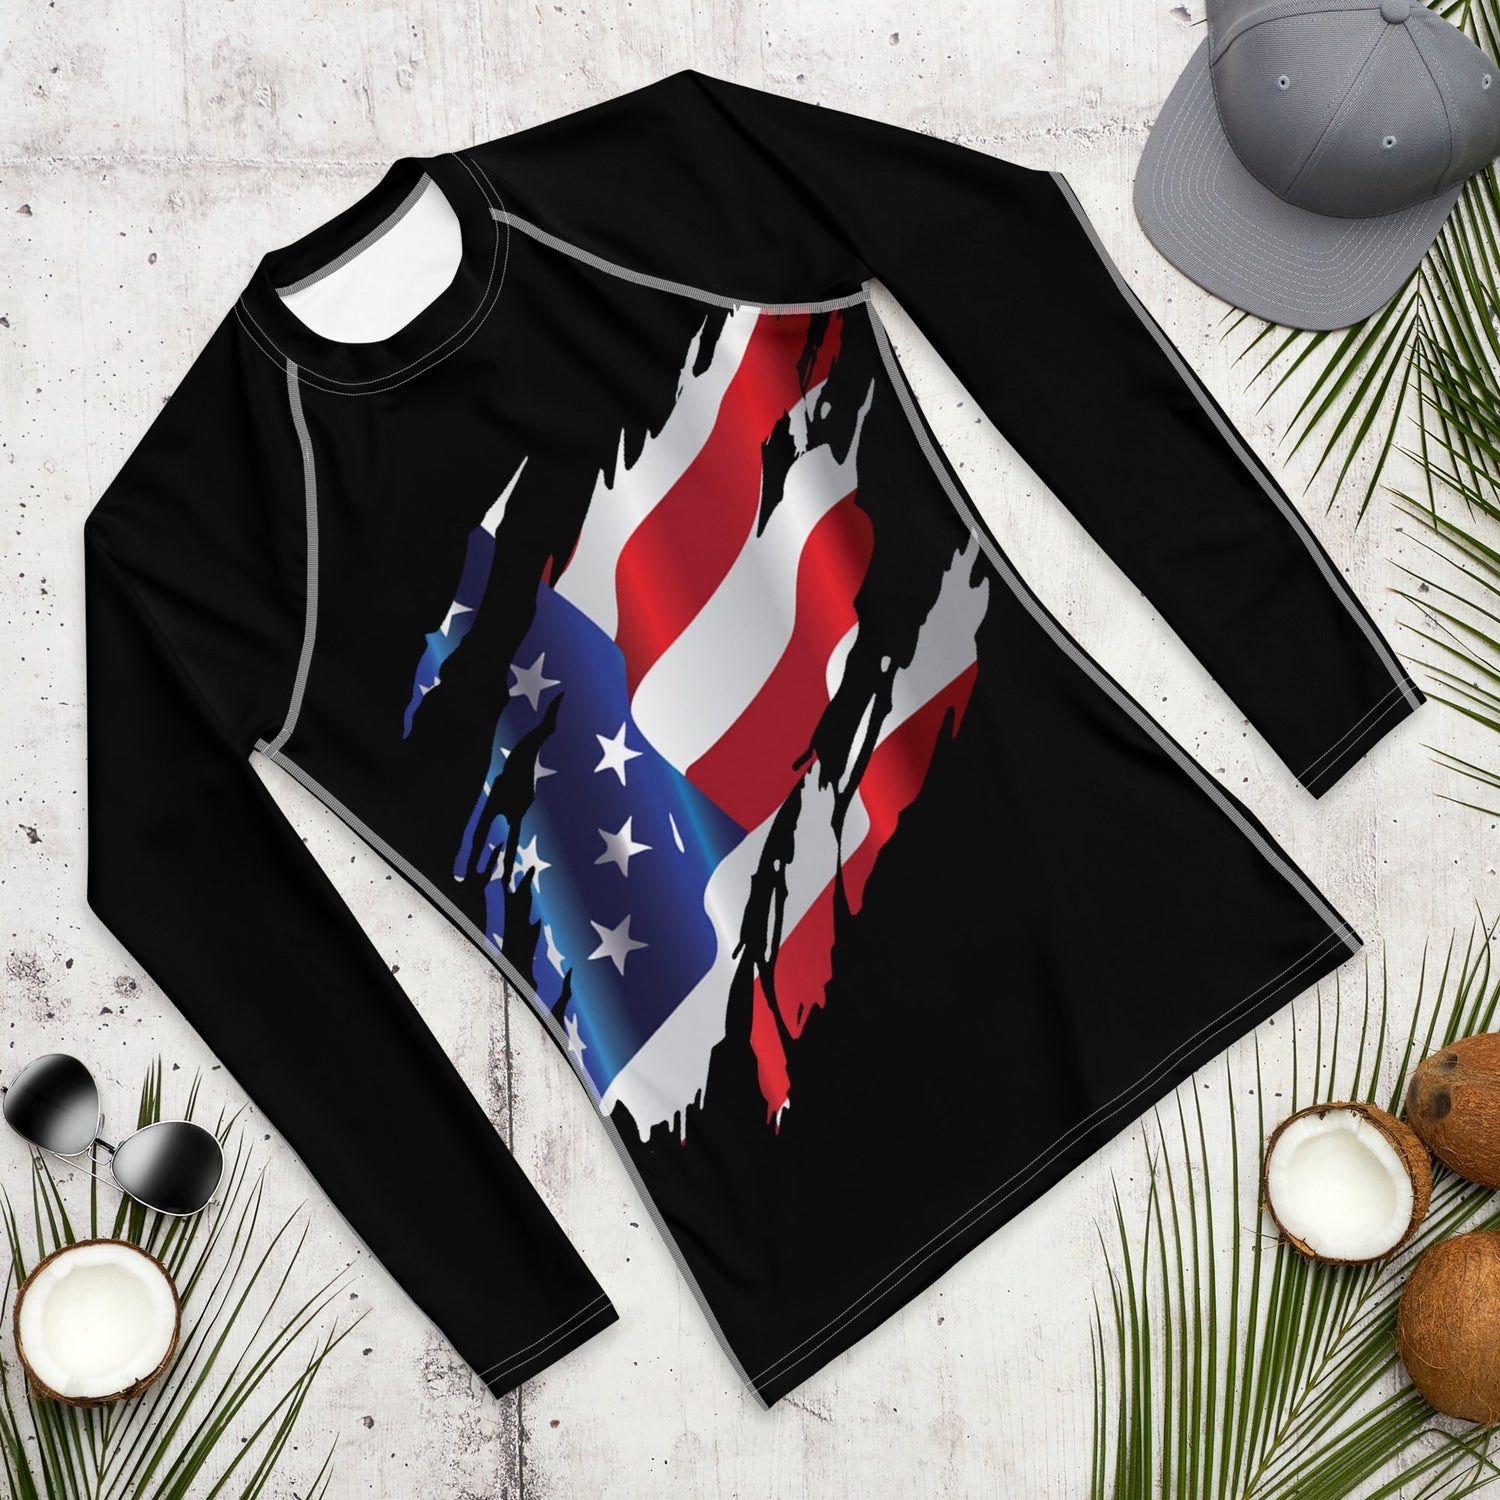 Rash Guard Patriot - For Fathers Fitness